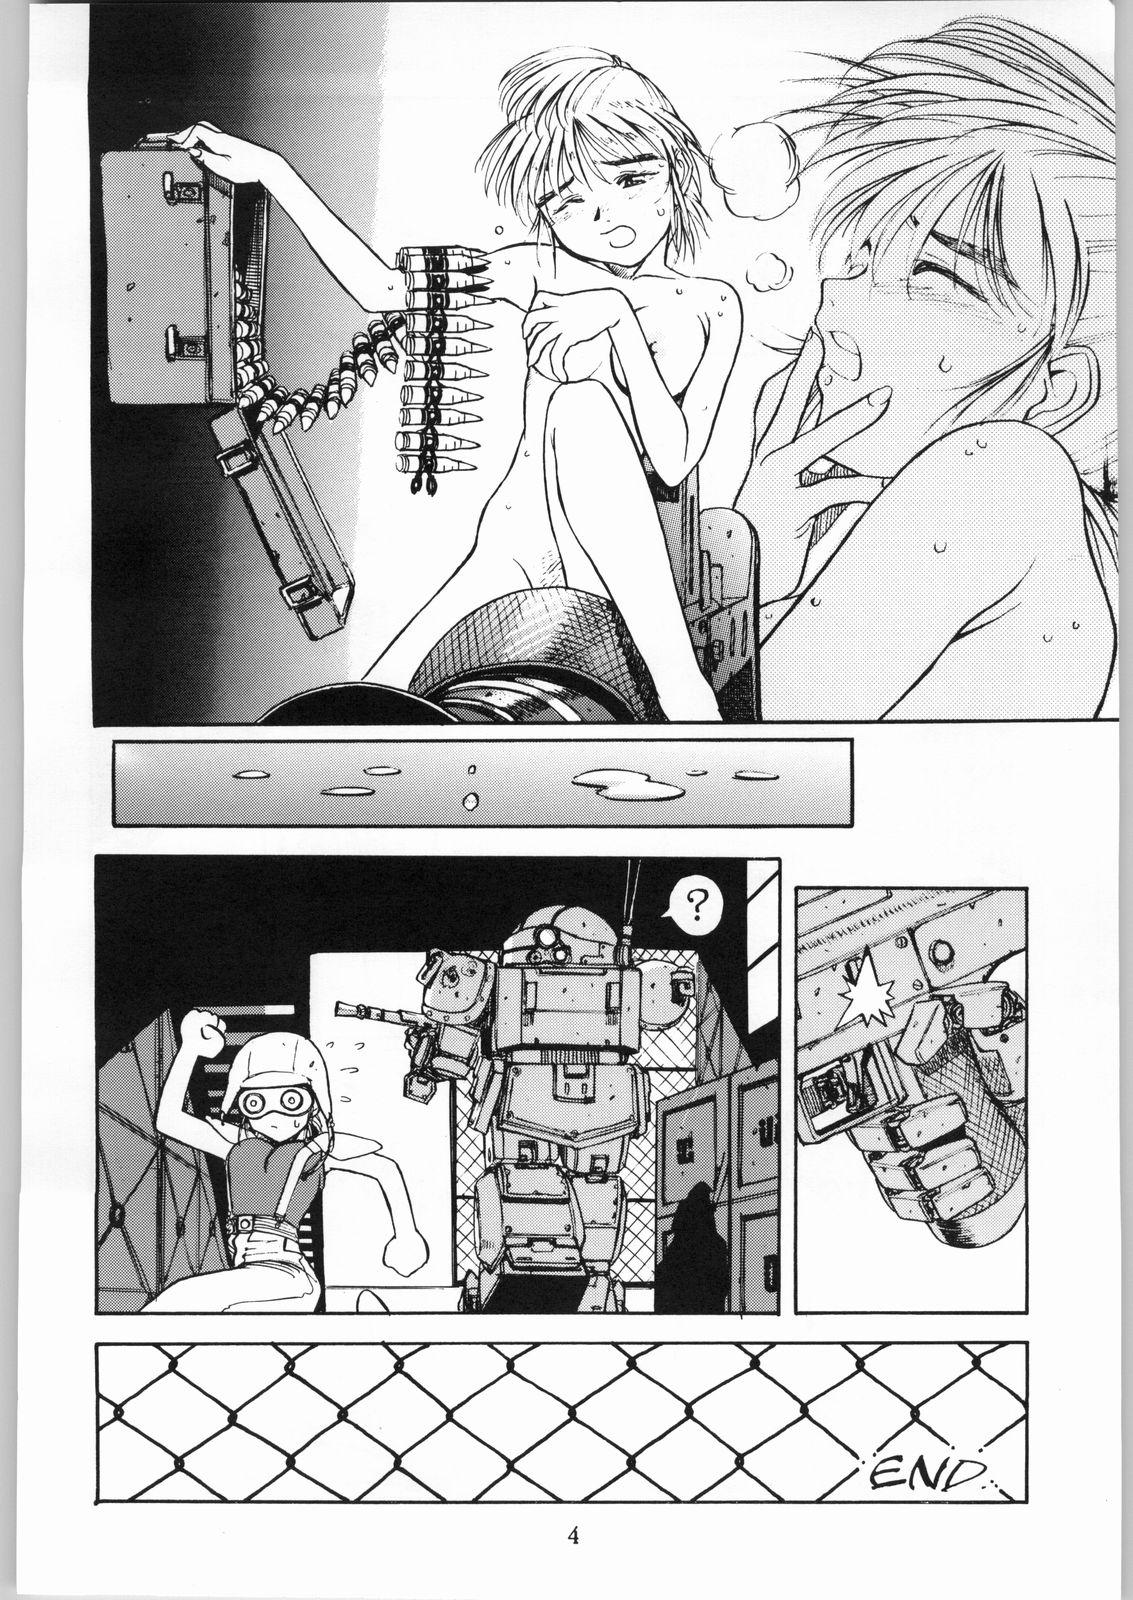 And Kanojo No Juu - Final fantasy vii Ghost in the shell British - Page 5